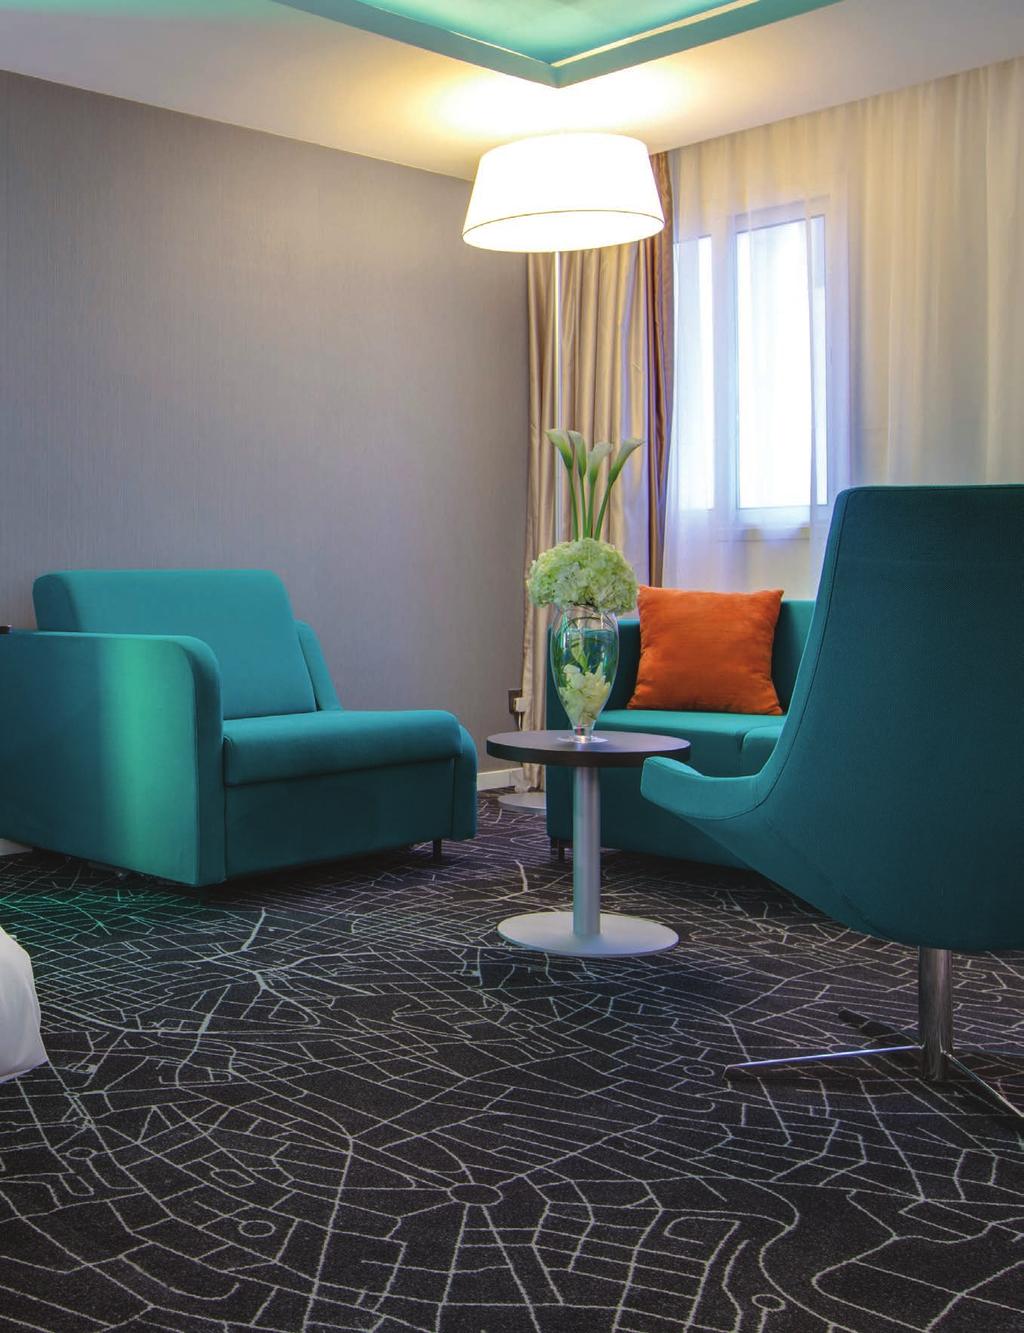 colorful inside and out Within the physical hotel, Park Inn by Radisson is known for its vibrant and colorful spaces which are informal, friendly and welcoming.